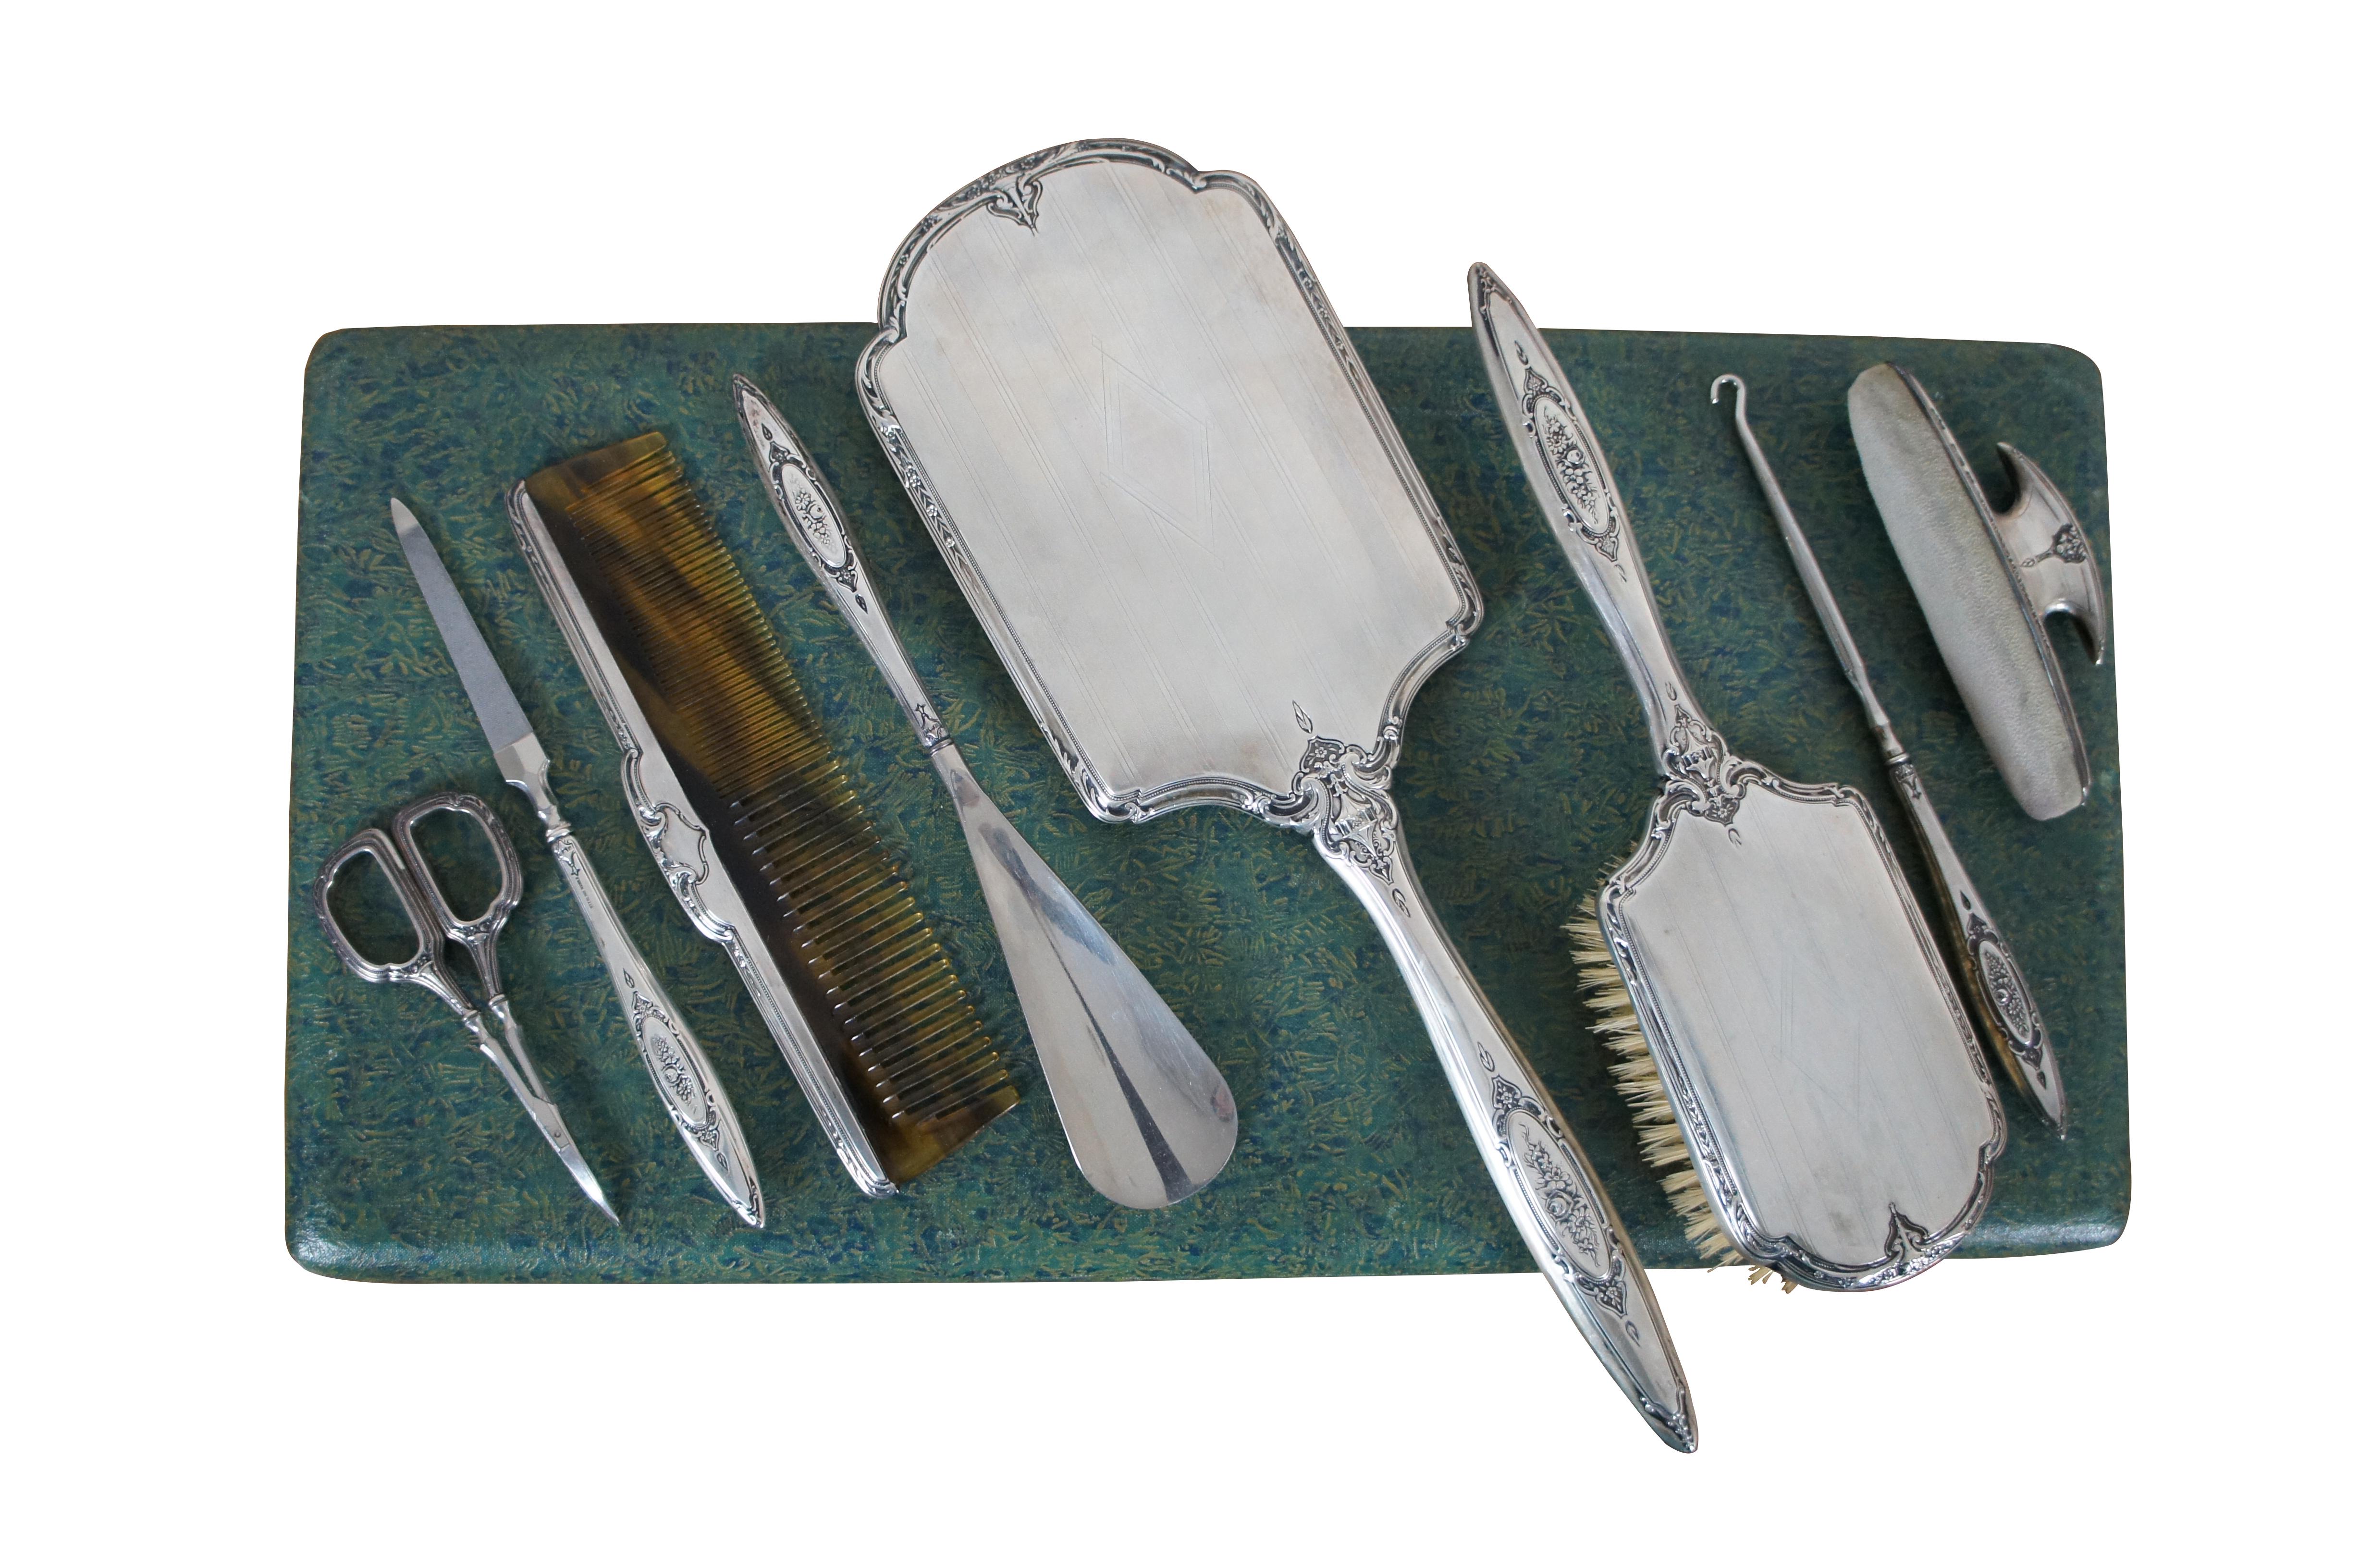 Impressive antique eight piece vanity grooming set by Robert Wallace & Sons featuring Art Deco styling with floral motif.  Includes mirror, brush, comb, scissors, file, button hook loop, buffing pad, shoe horn and purple velvet lined box case.

